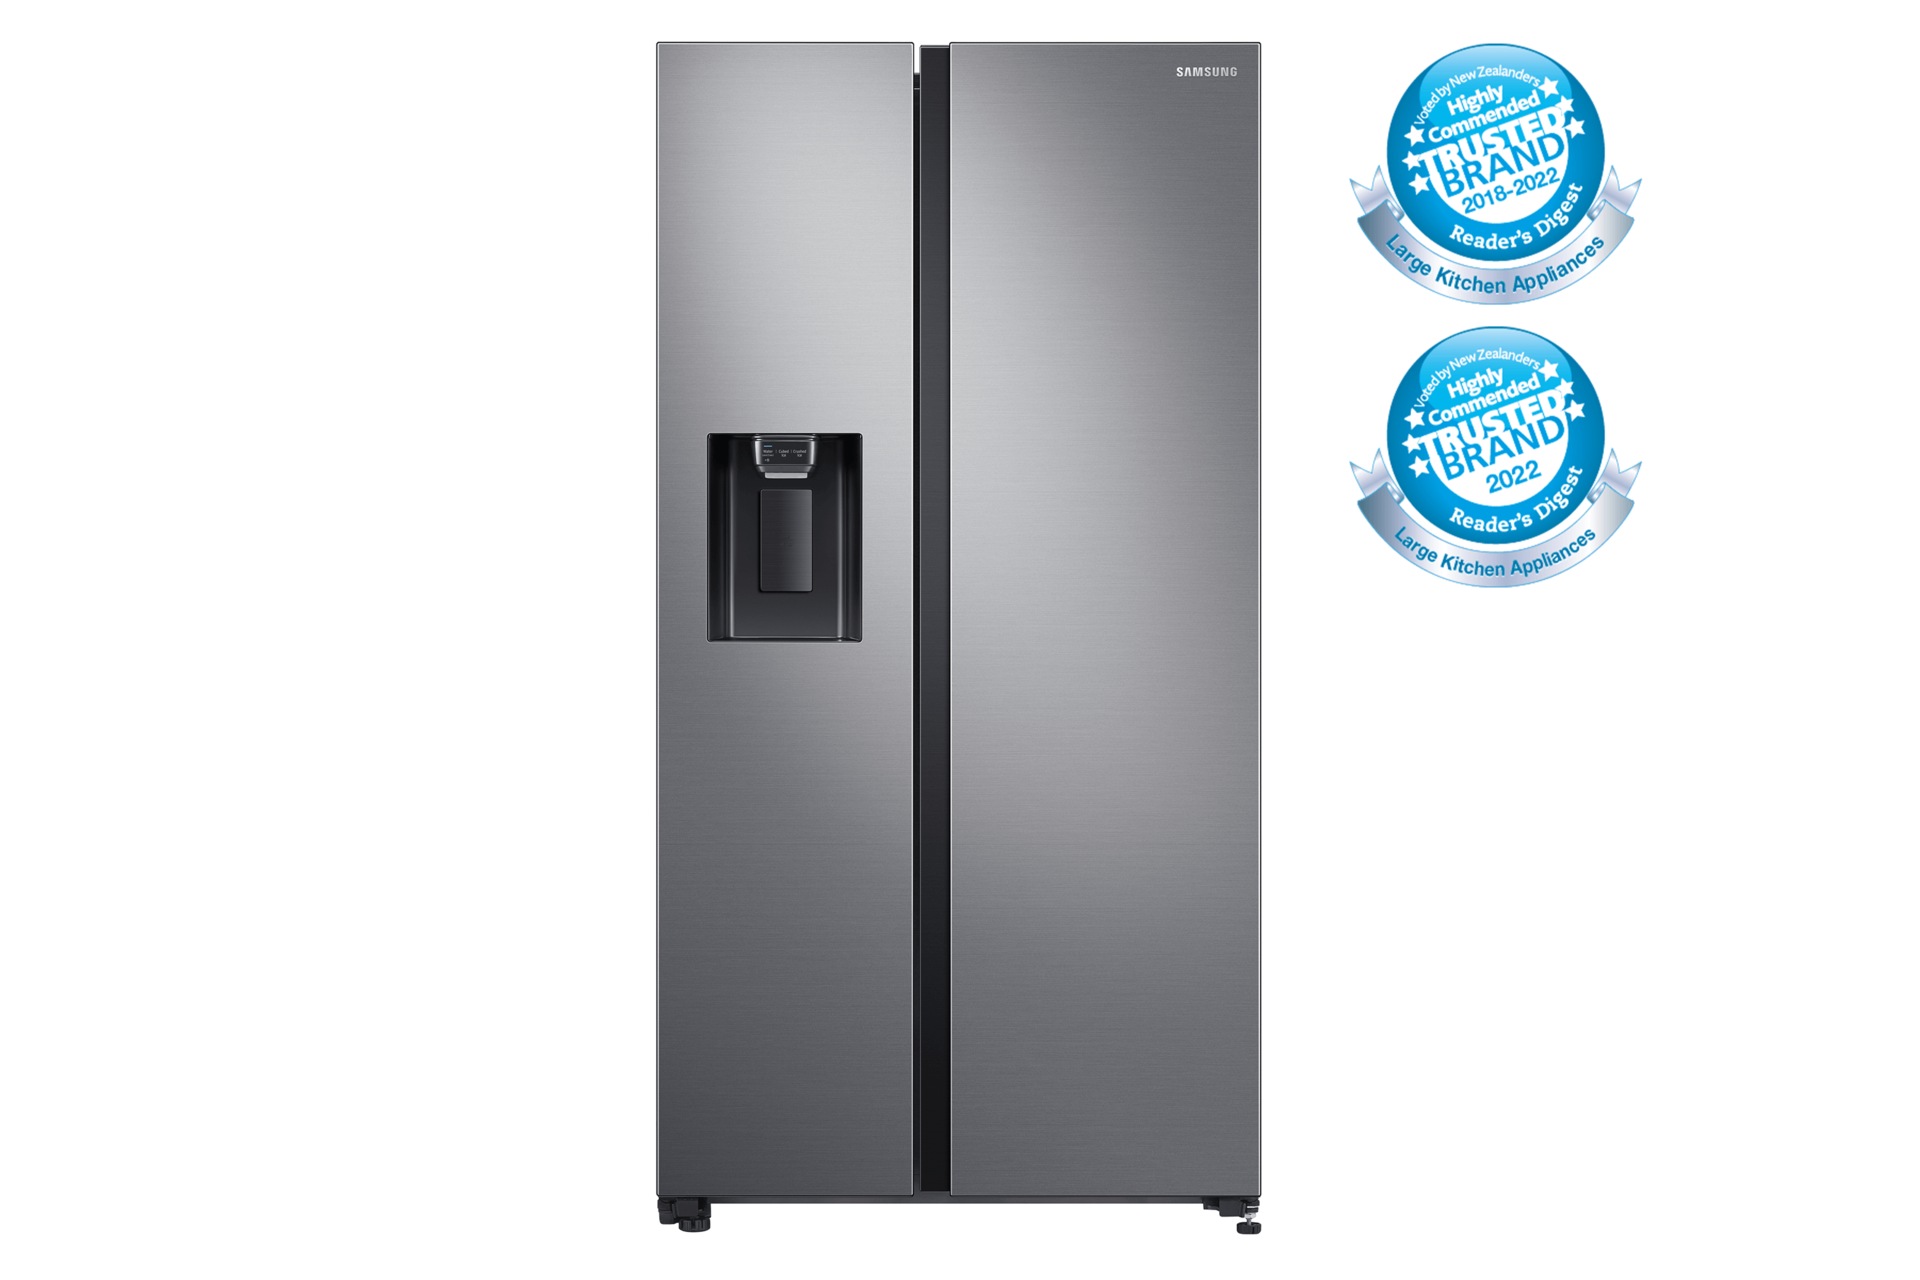 Front view of the Samsung 635L Side By Side Fridge (SRS675DLS) in Silver colour.